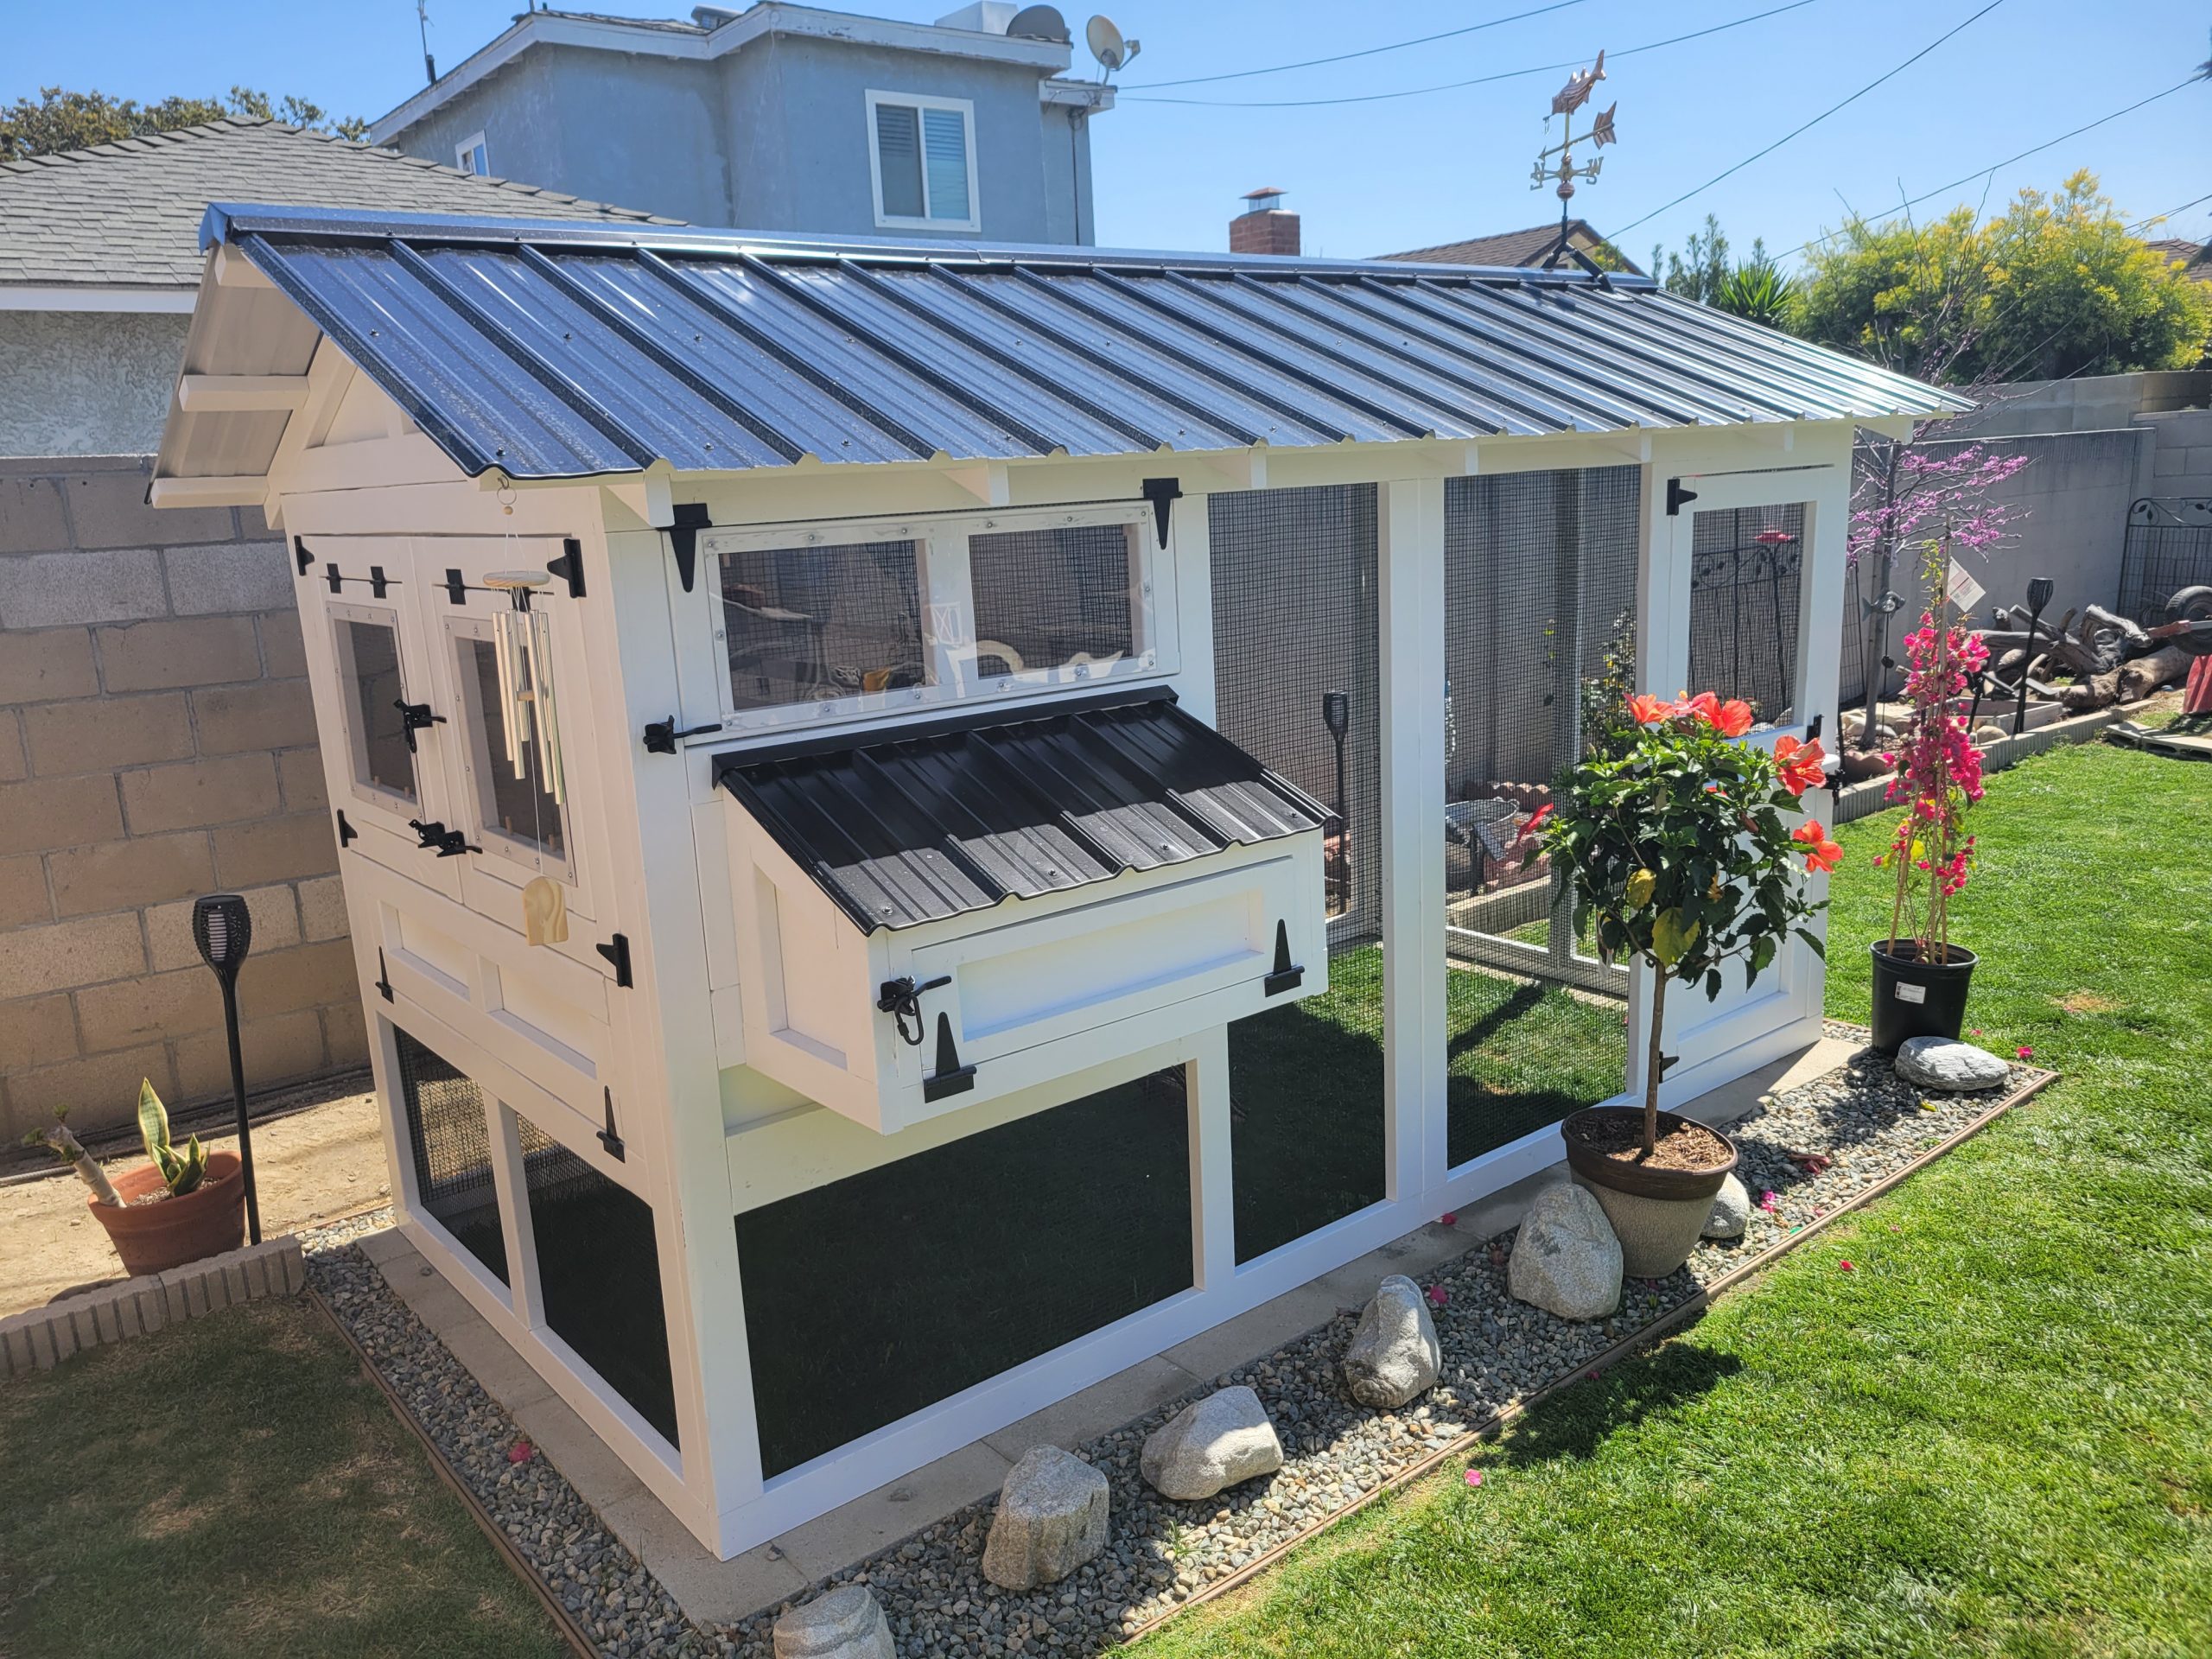 6’x12′ American Coop in California assembled and painted by customer (12)